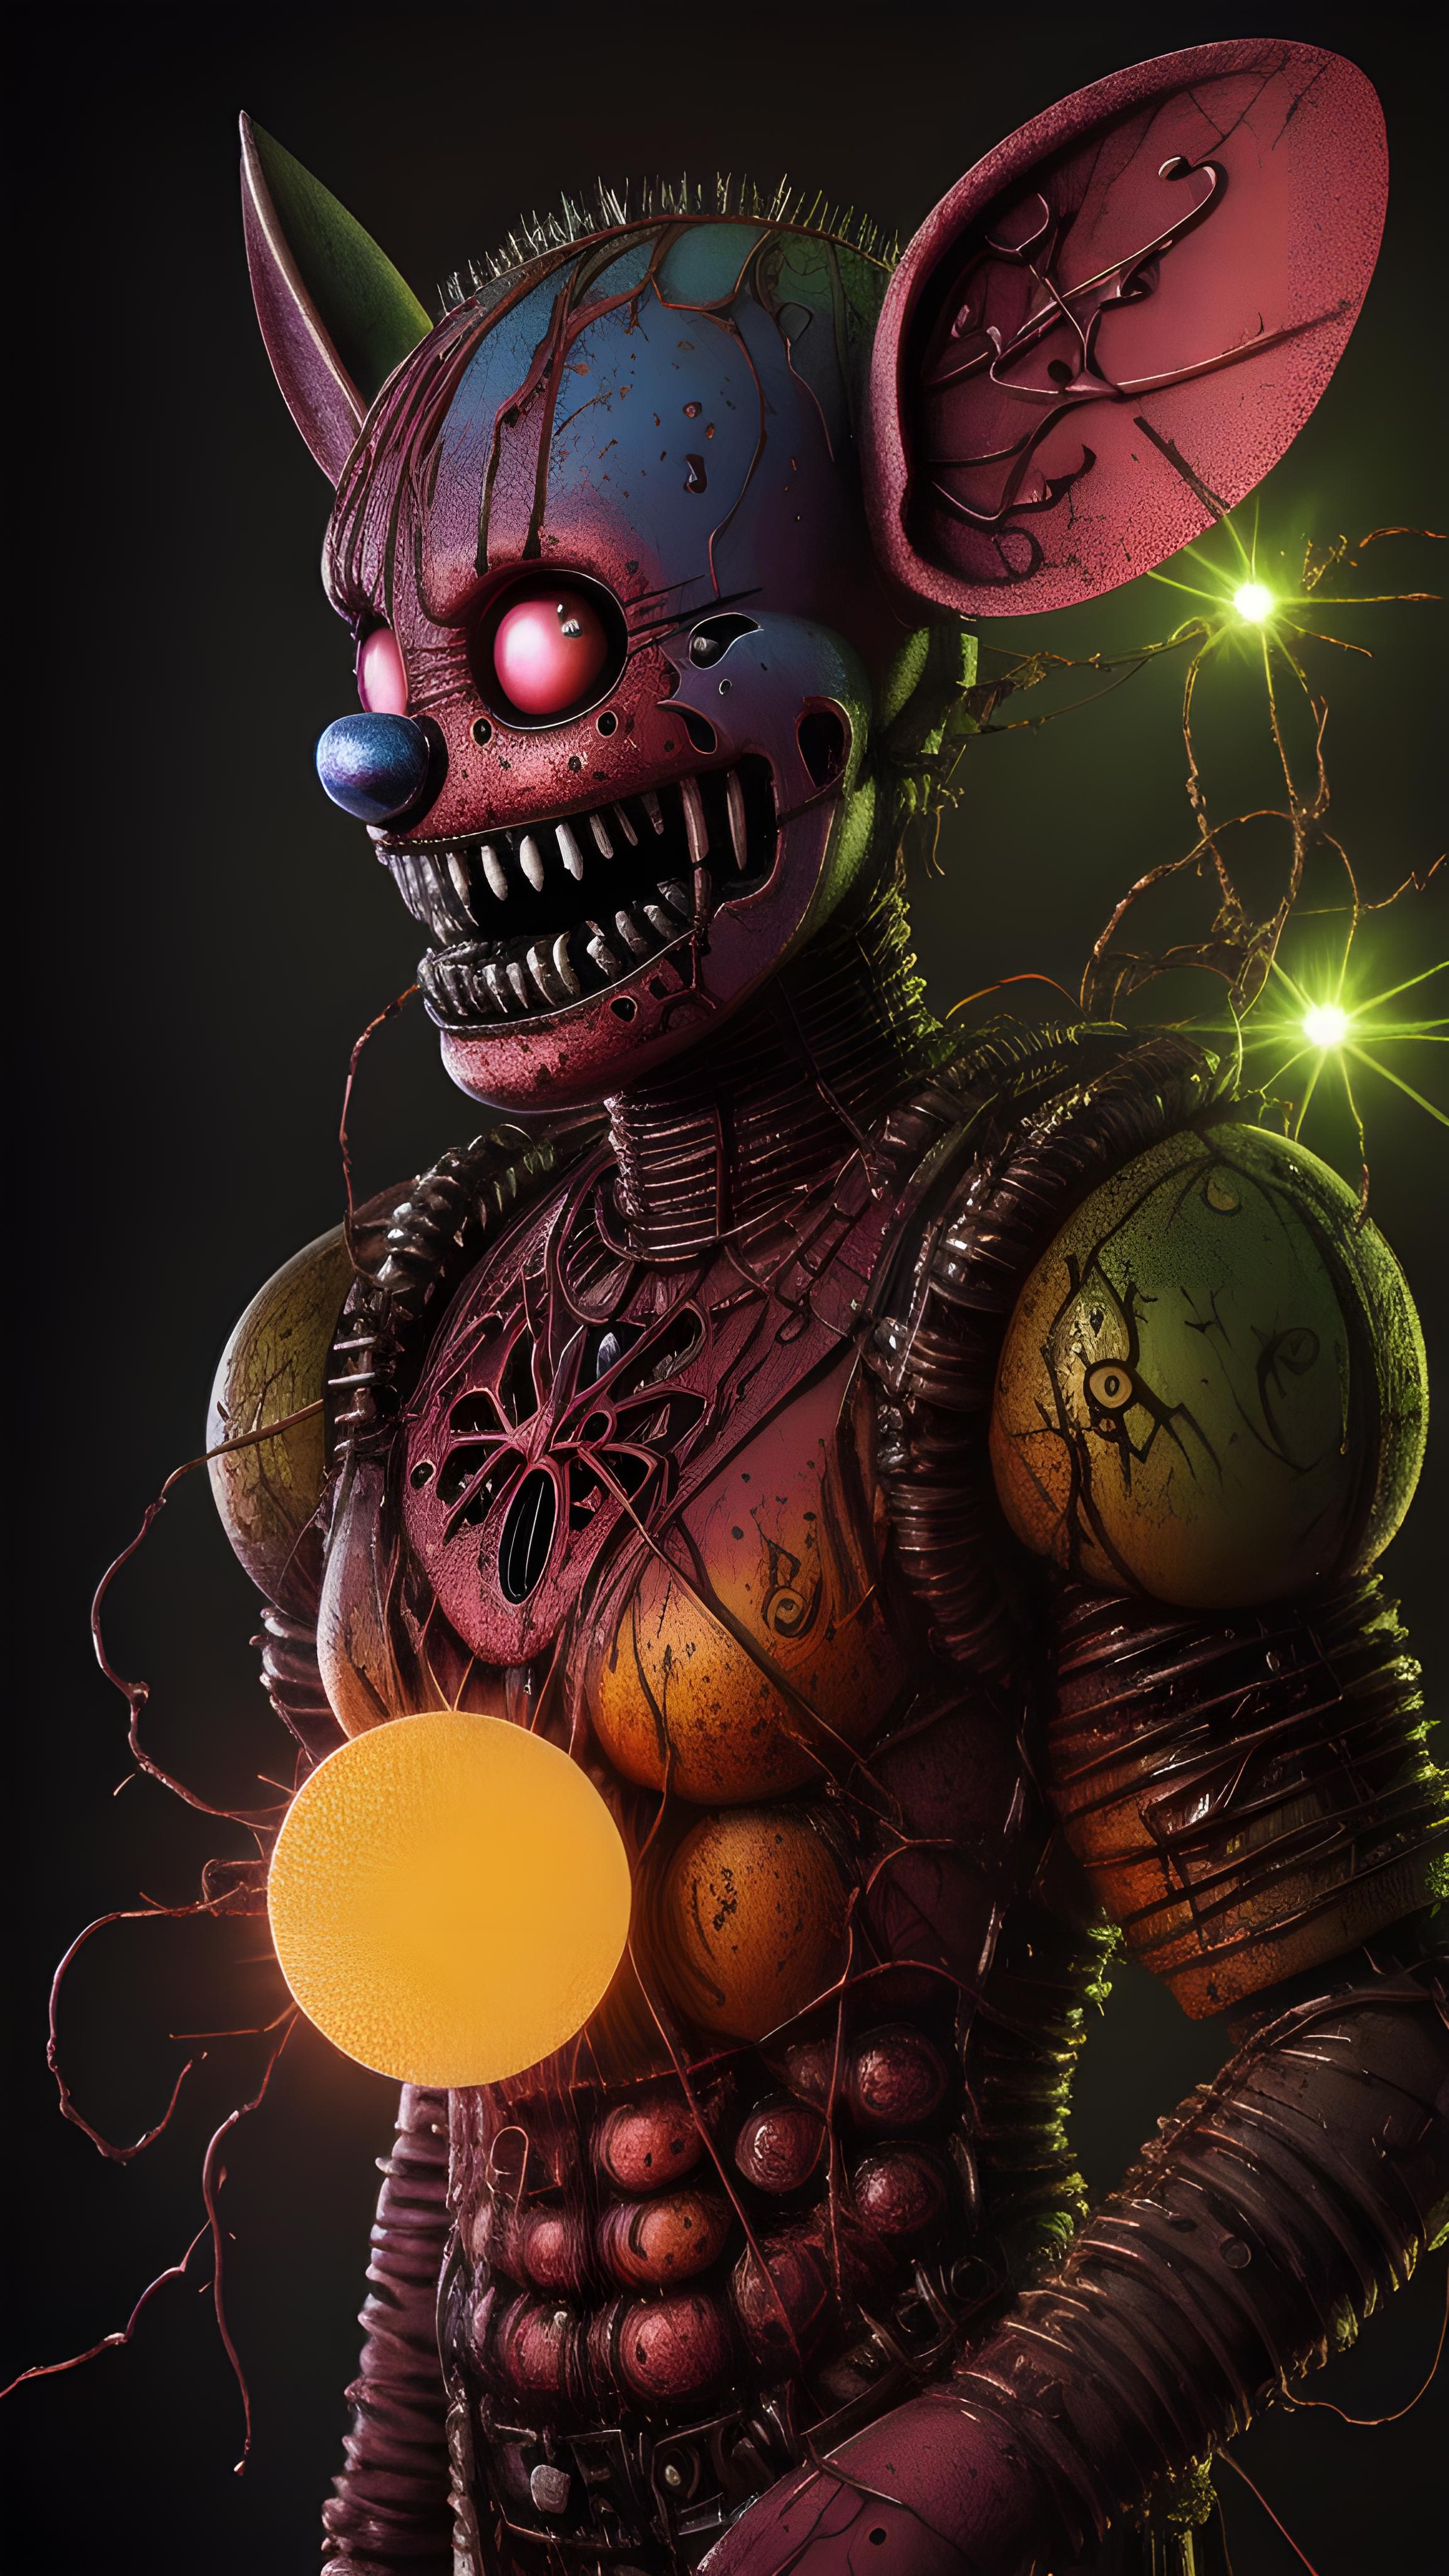 A robot with a glowing yellow circle in its chest, surrounded by wires and lights.